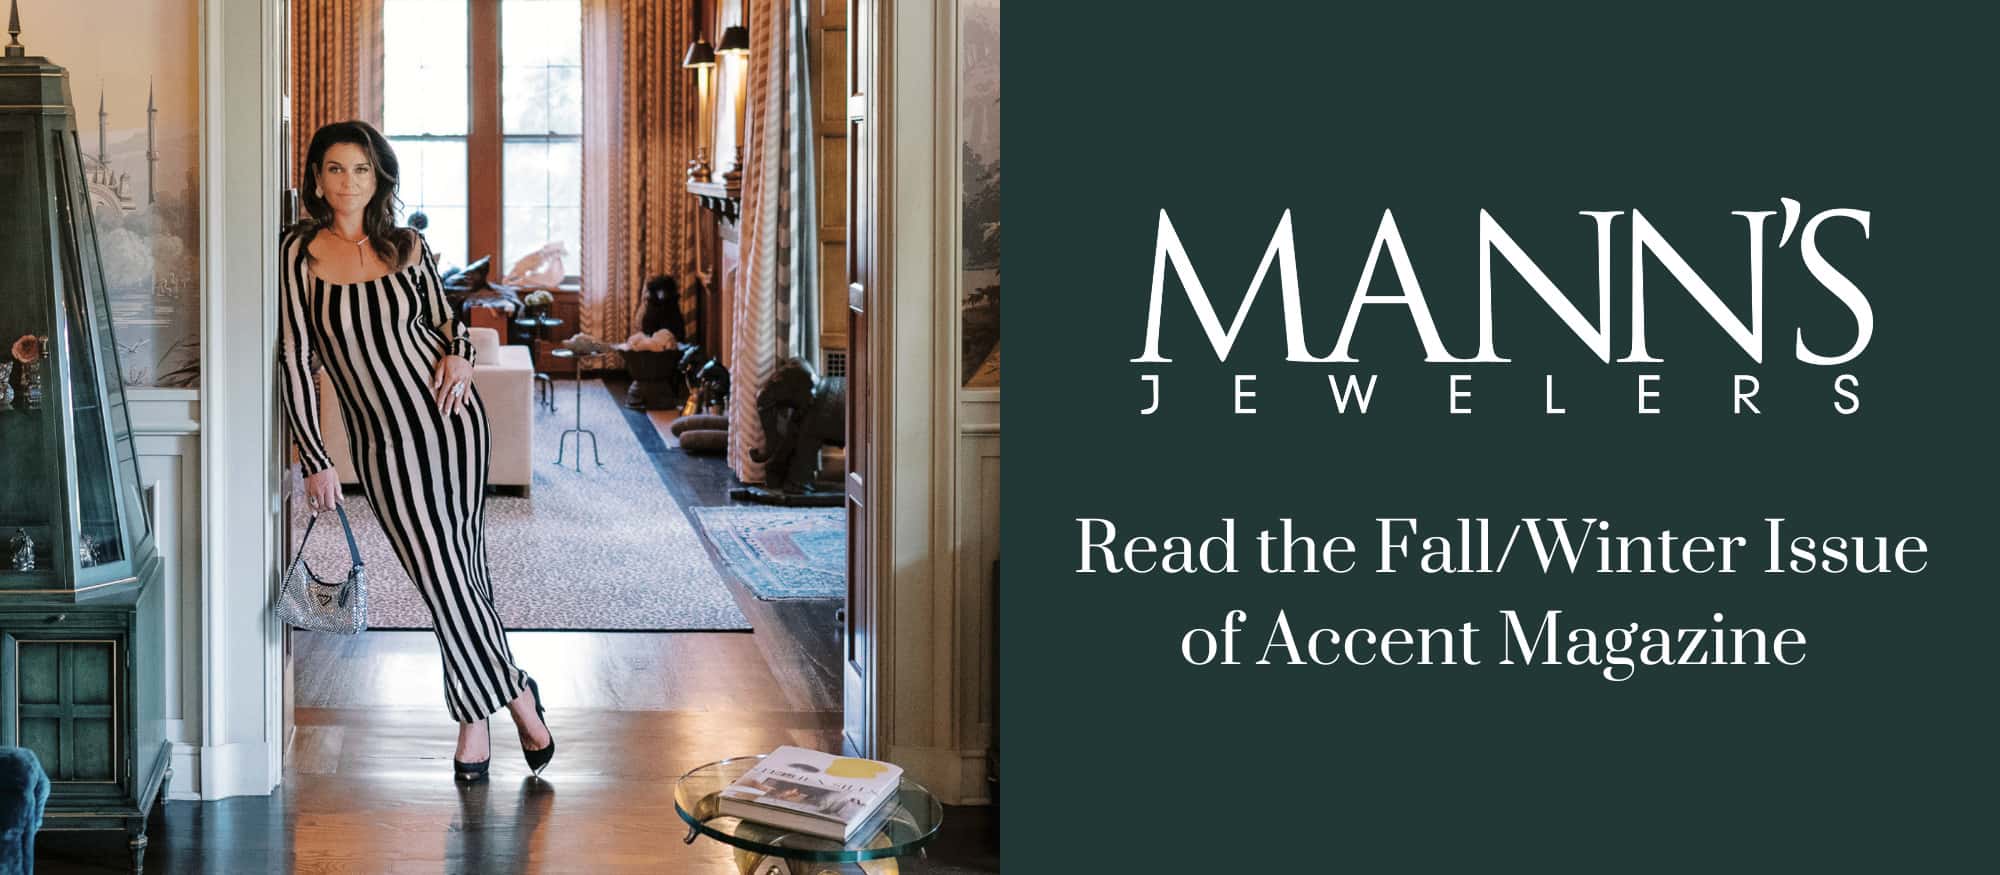 Mann's Jewelers Featured in Accent Magazine